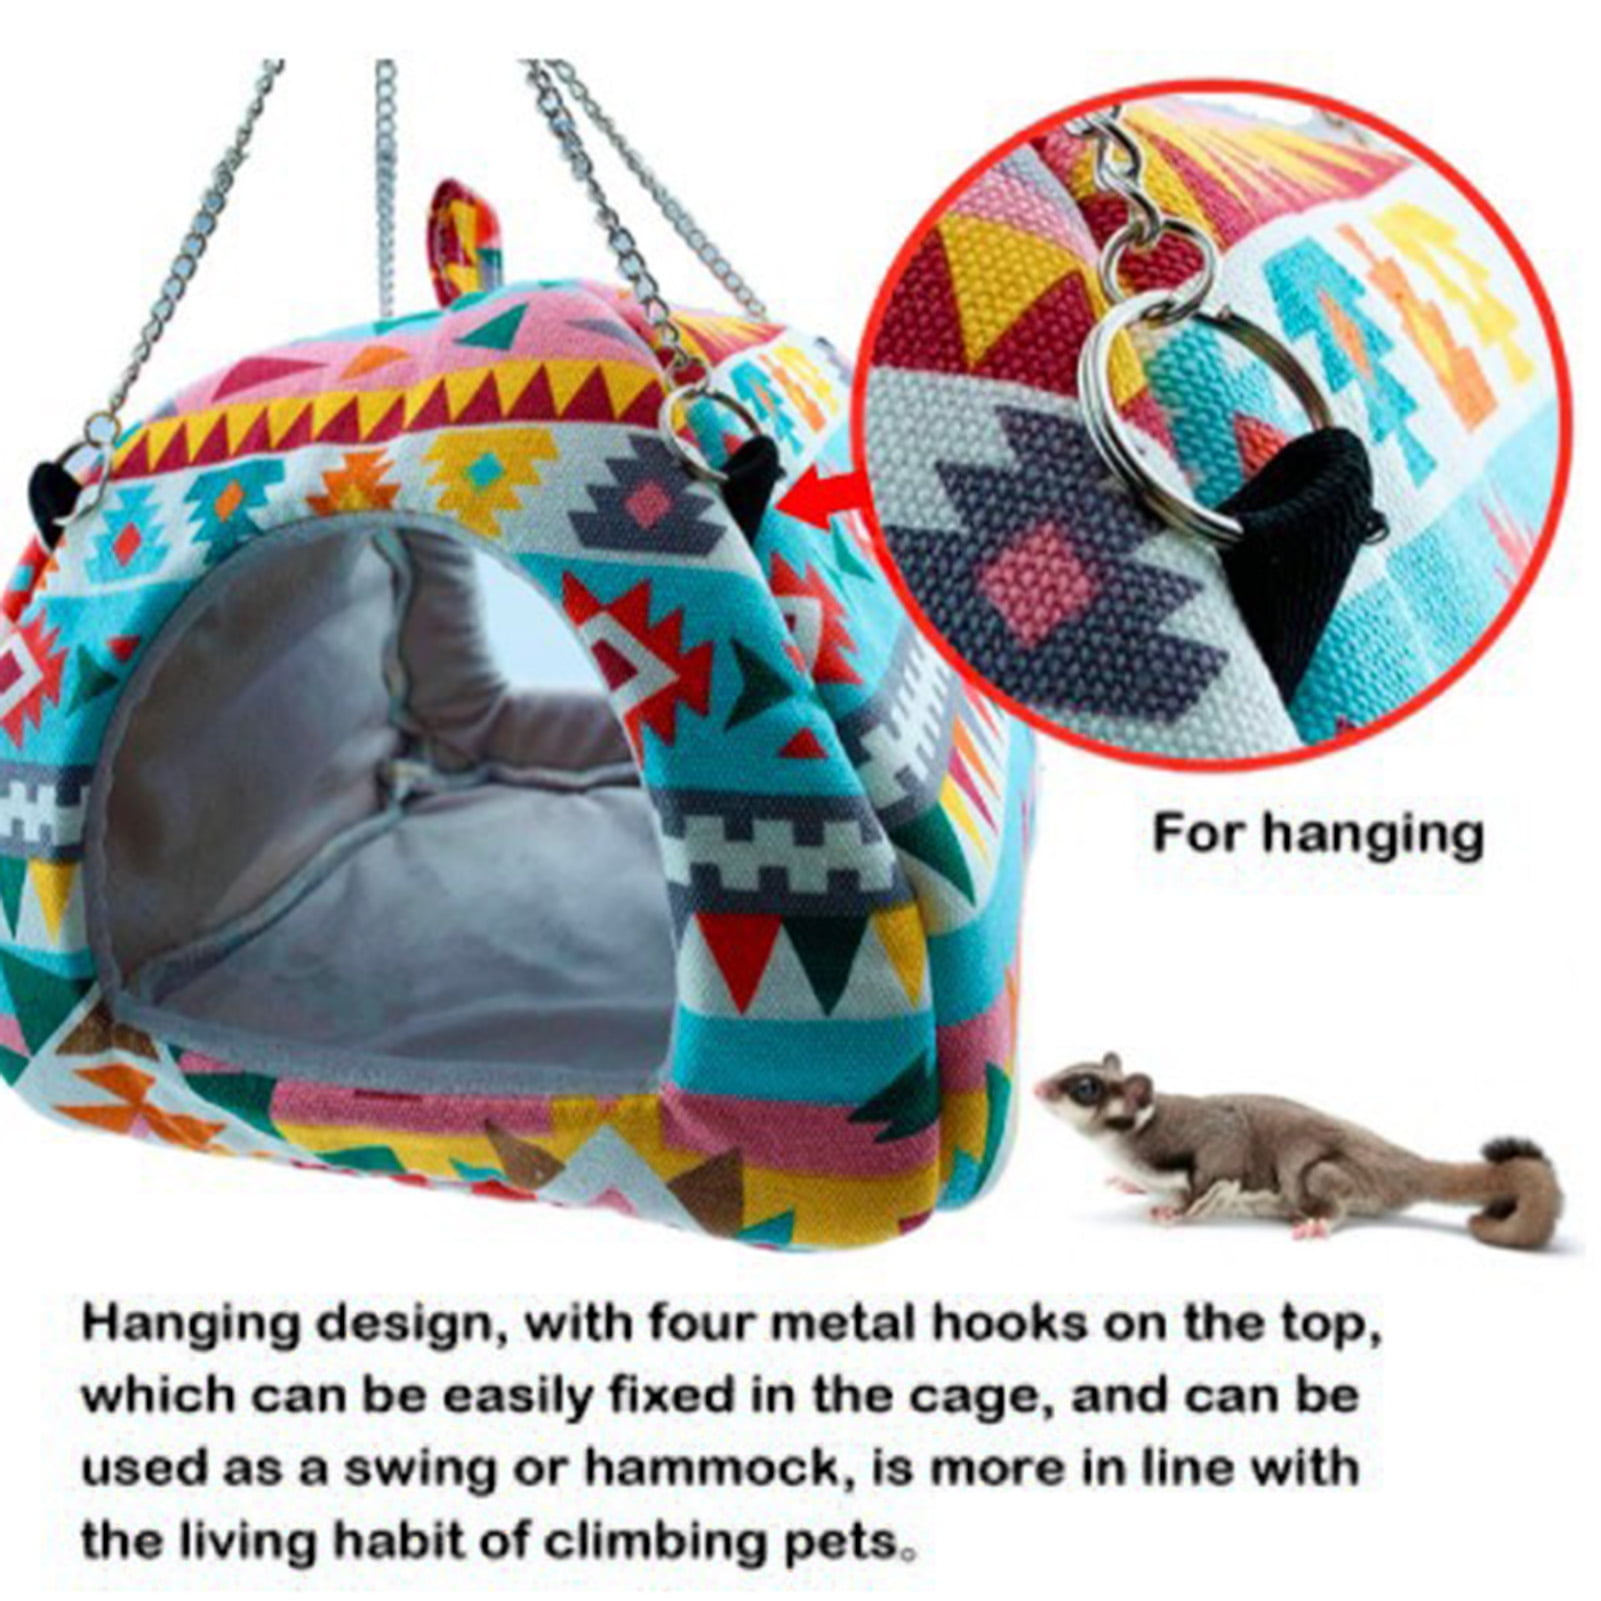 8.66 inch Guinea Pig Hamster Bird Squirrel Ferret Suger Glider Hedgehog Chinchillas Bed Hammock Winter Warm Small Pet Animal Hanging Home House Cotton Cage Nest Tent Ethnic style + mat, extra large 